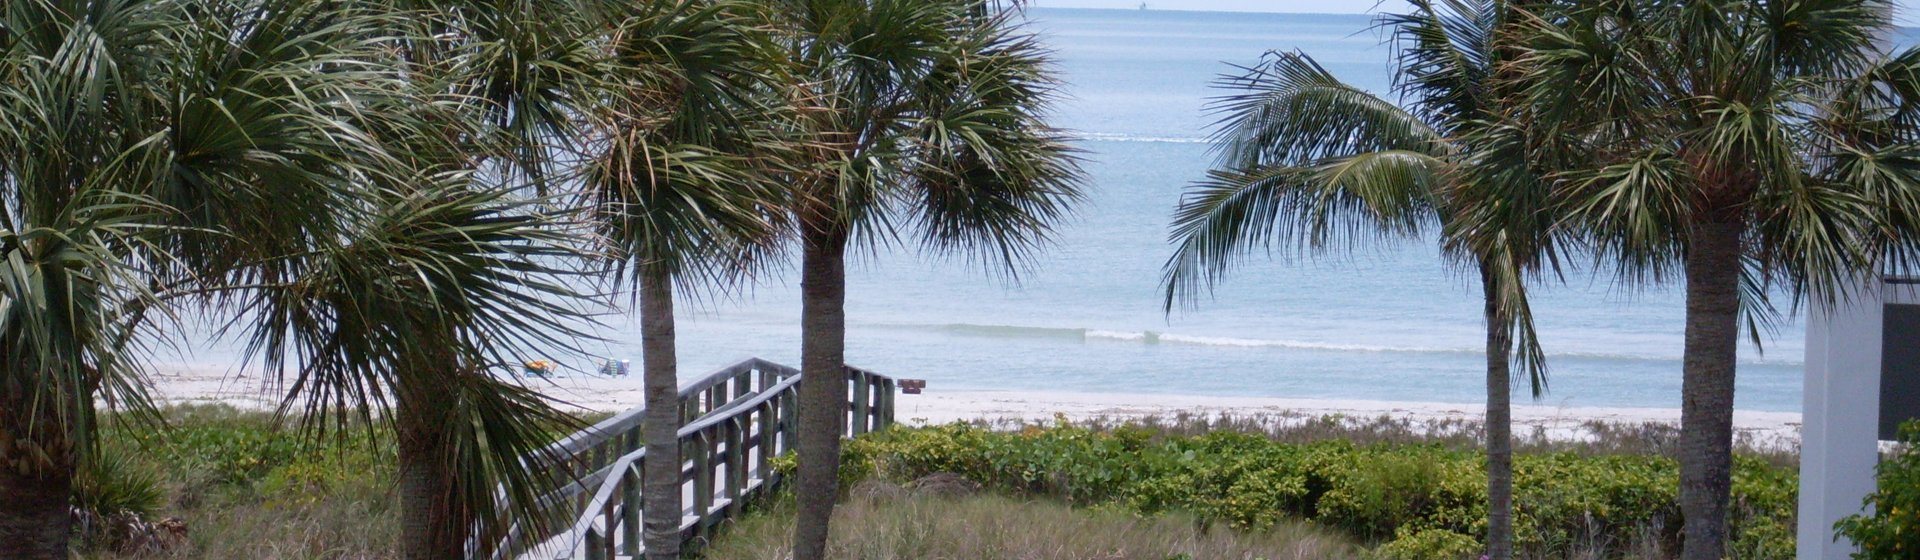 Sanibel Island Fl Real Estate Unlike most Florida real estate agents, Mike Badenoch, Buyer's Choice Realty Group, Inc. only works with buyers, never sellers. Call Mike at 239-292-1233 to find property in Sanibel or Captiva. https://www.yourexclusivebuyeragent.com/ by MikeBadenoch